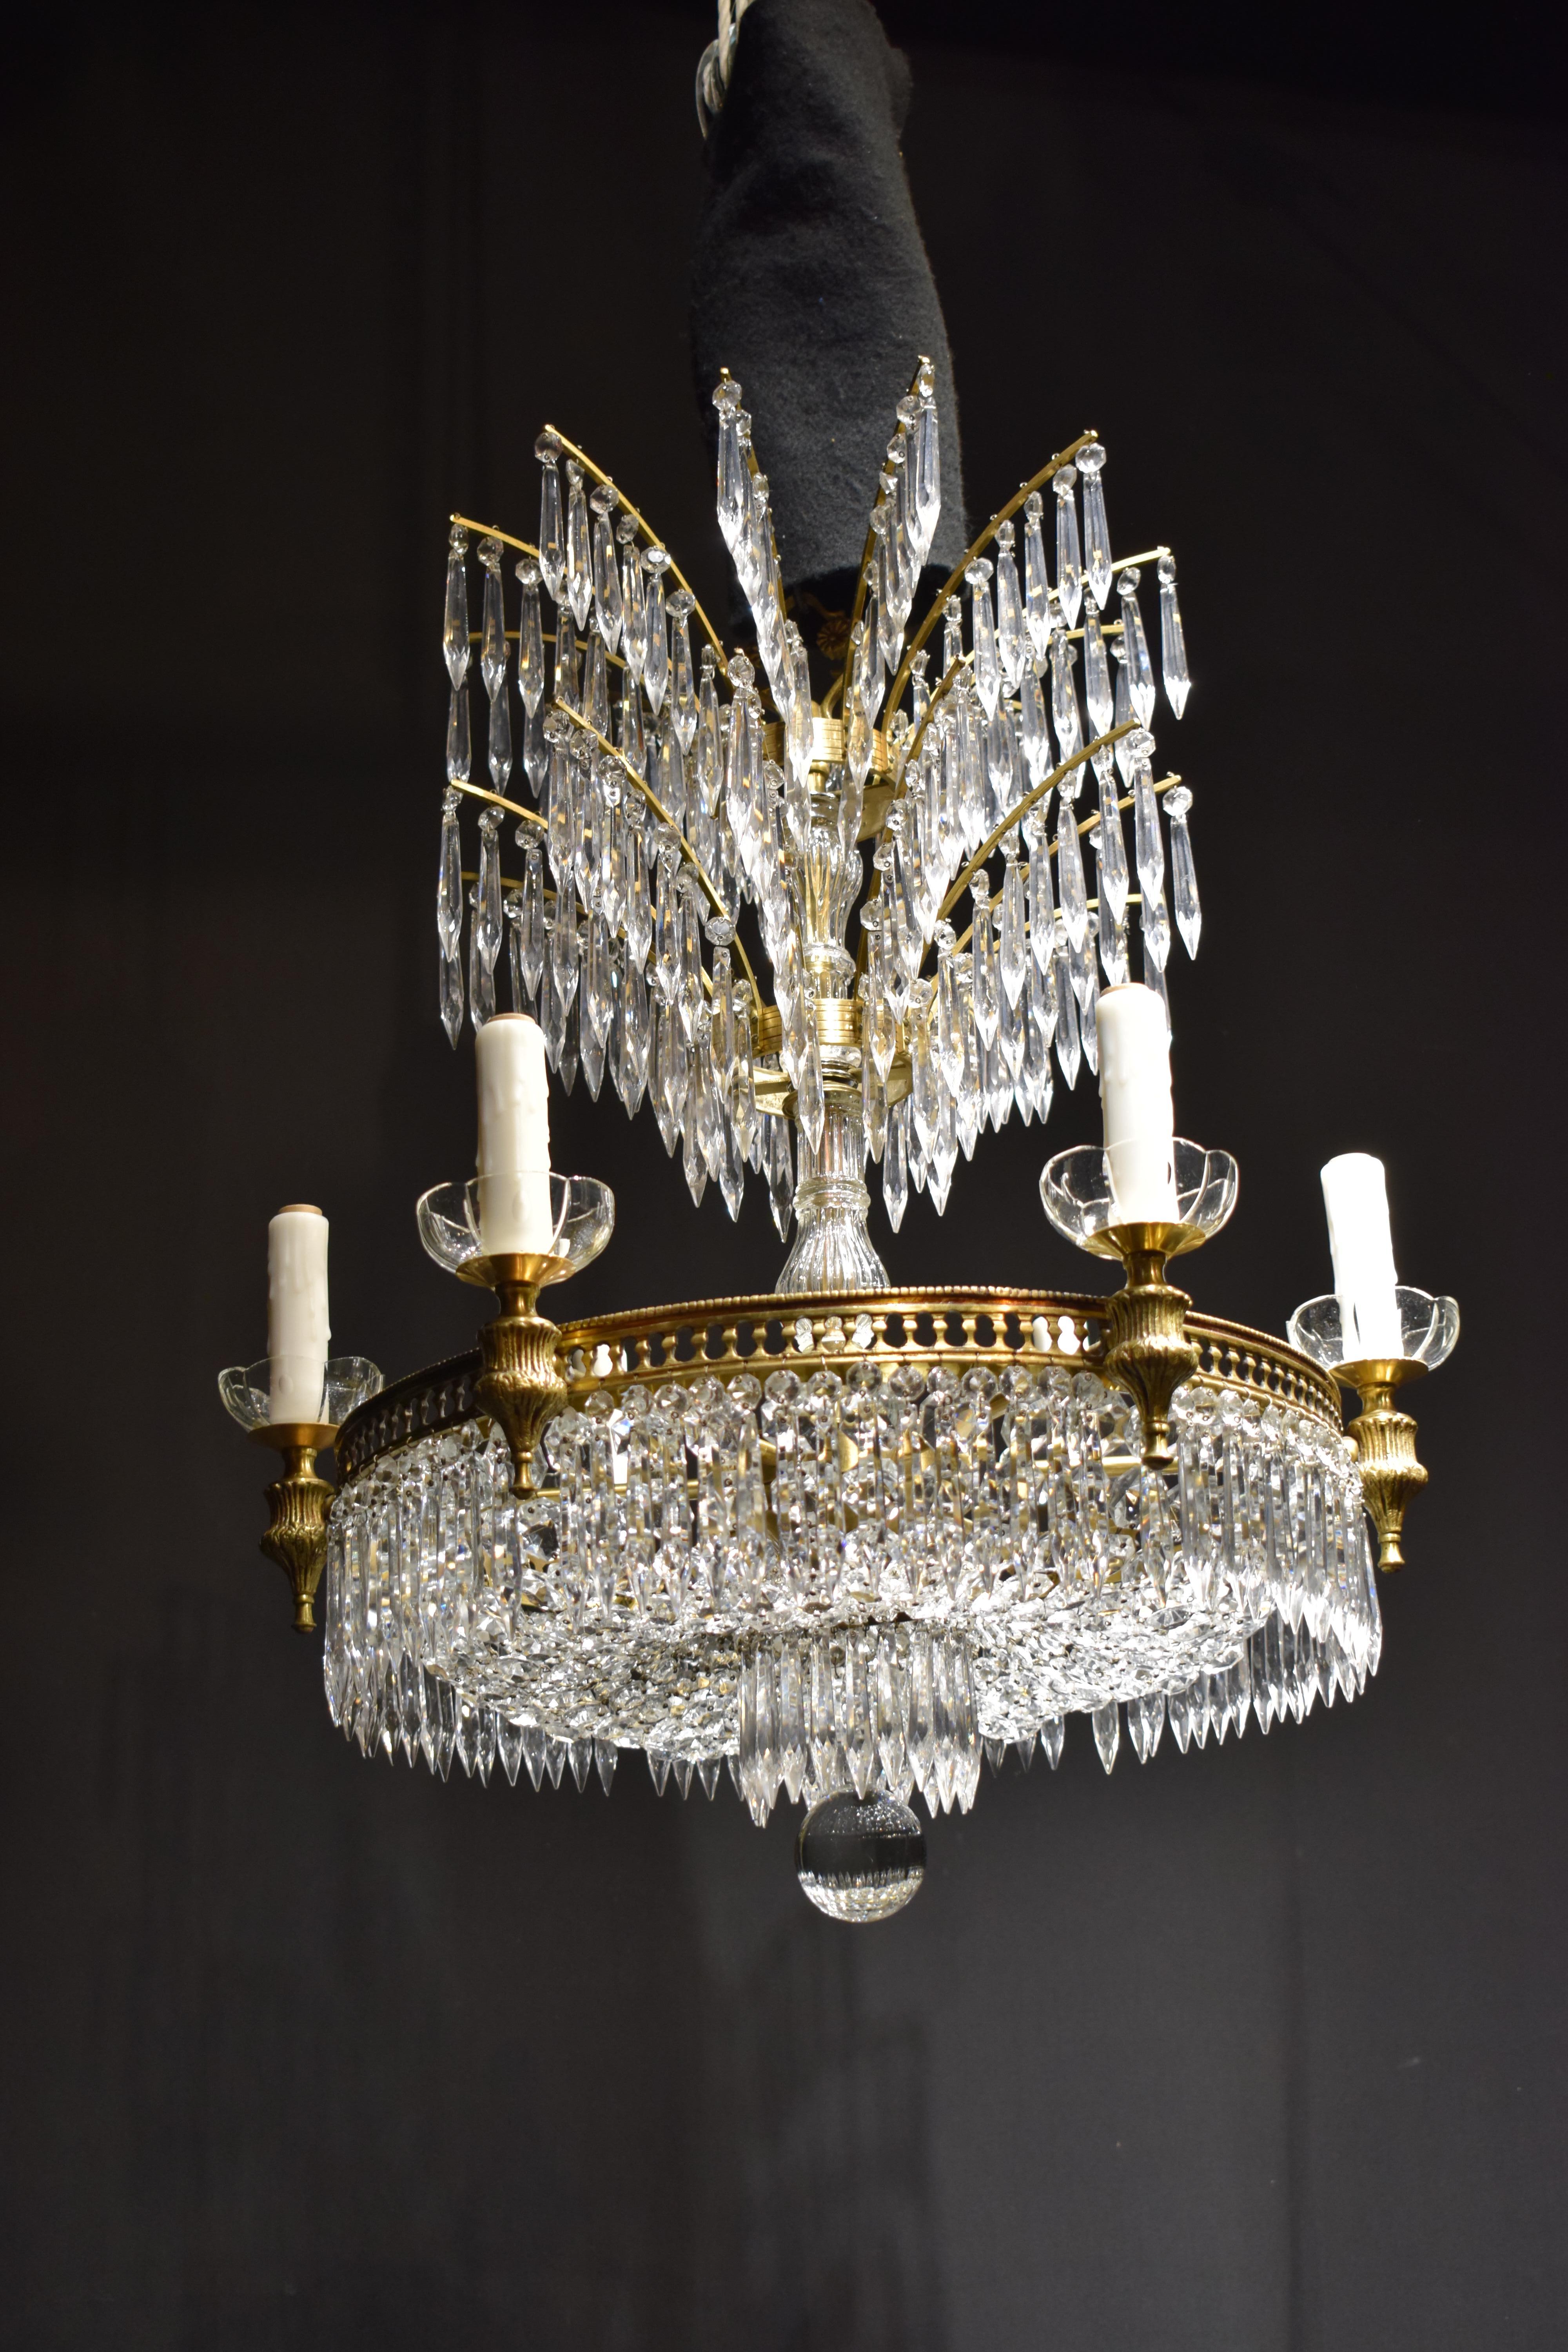 A very fine neoclassical chandelier featuring a 